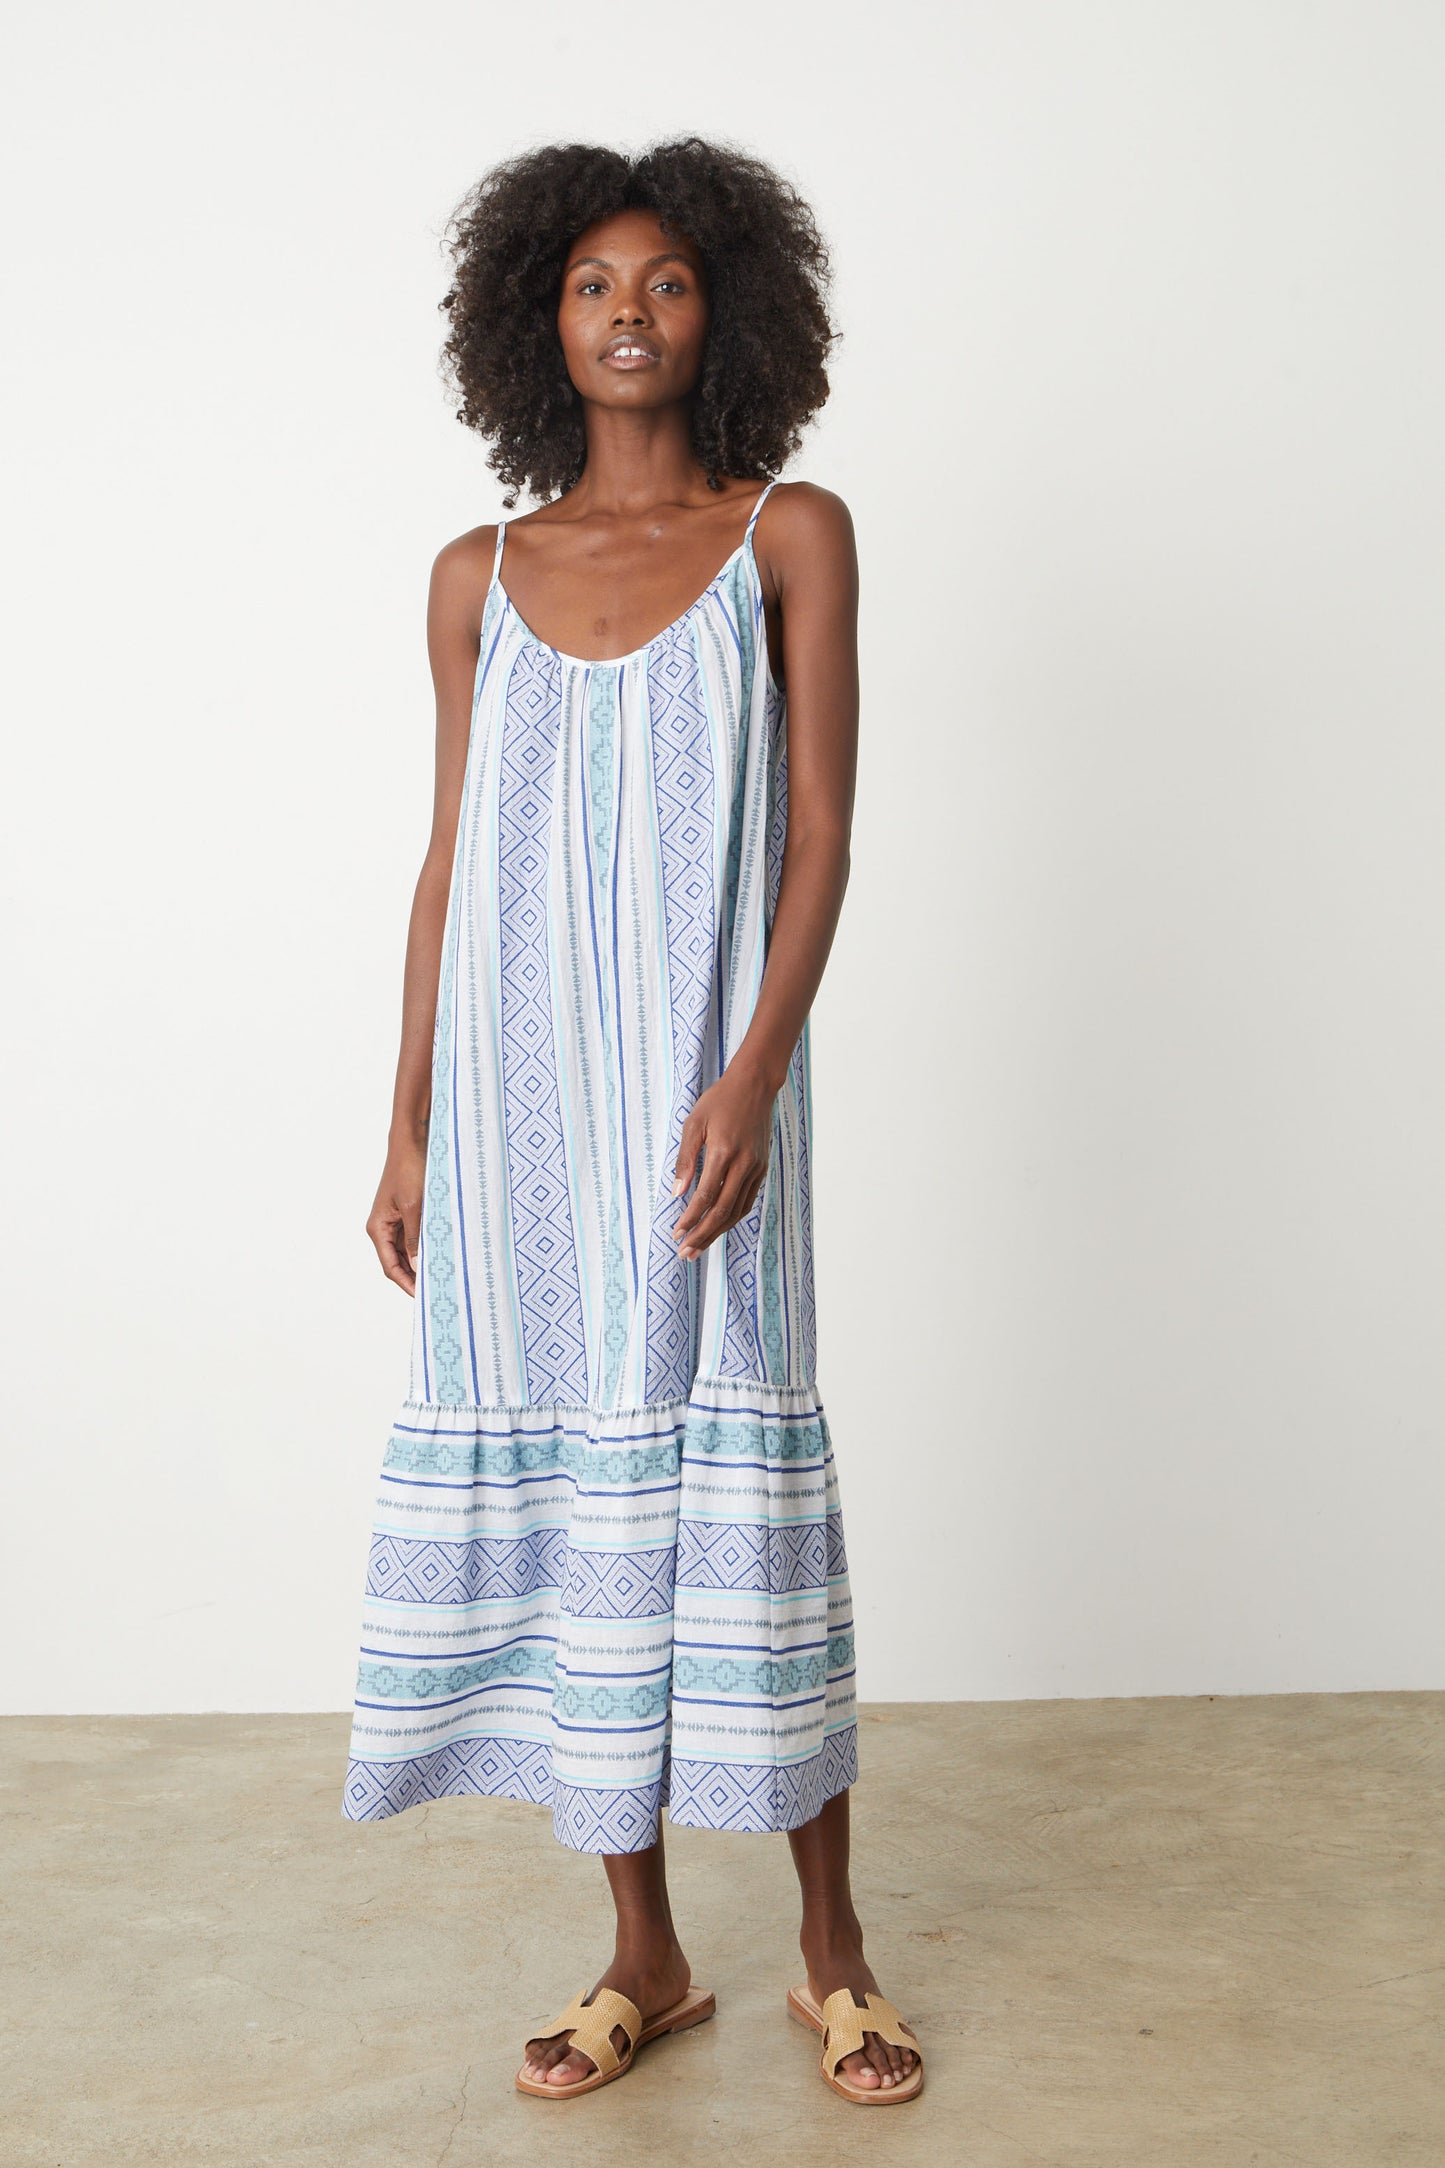 A woman wearing a Velvet by Graham & Spencer LEXY JACQUARD DRESS in blue and white stripe jacquard print full length with sandals.-26577343545537